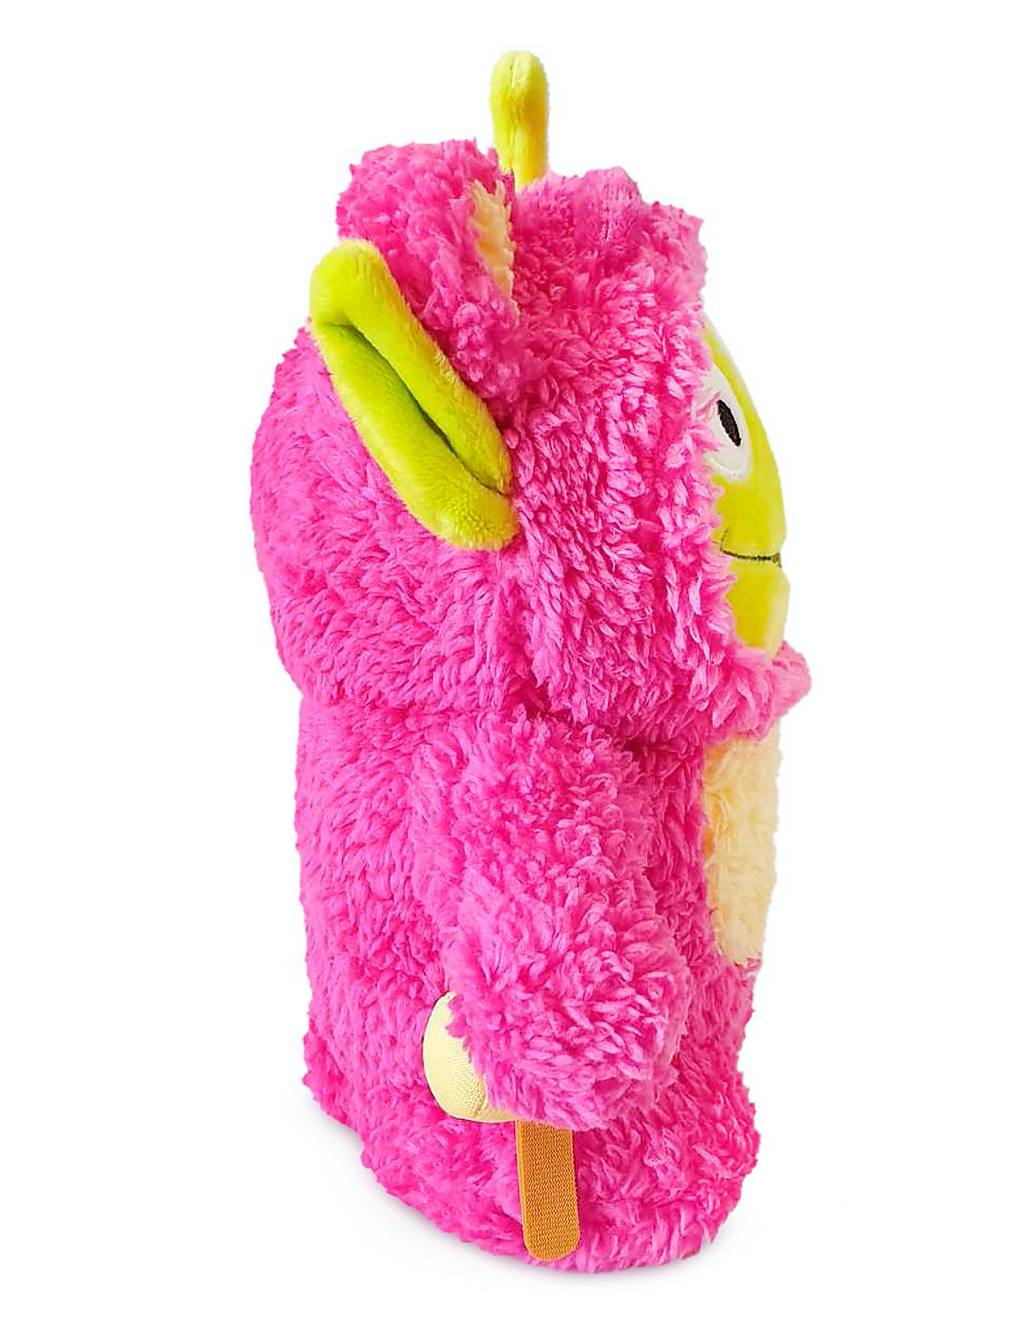 Disney Toy Story Alien Pixar Remix Plush Lotso Limited Release New with Tag